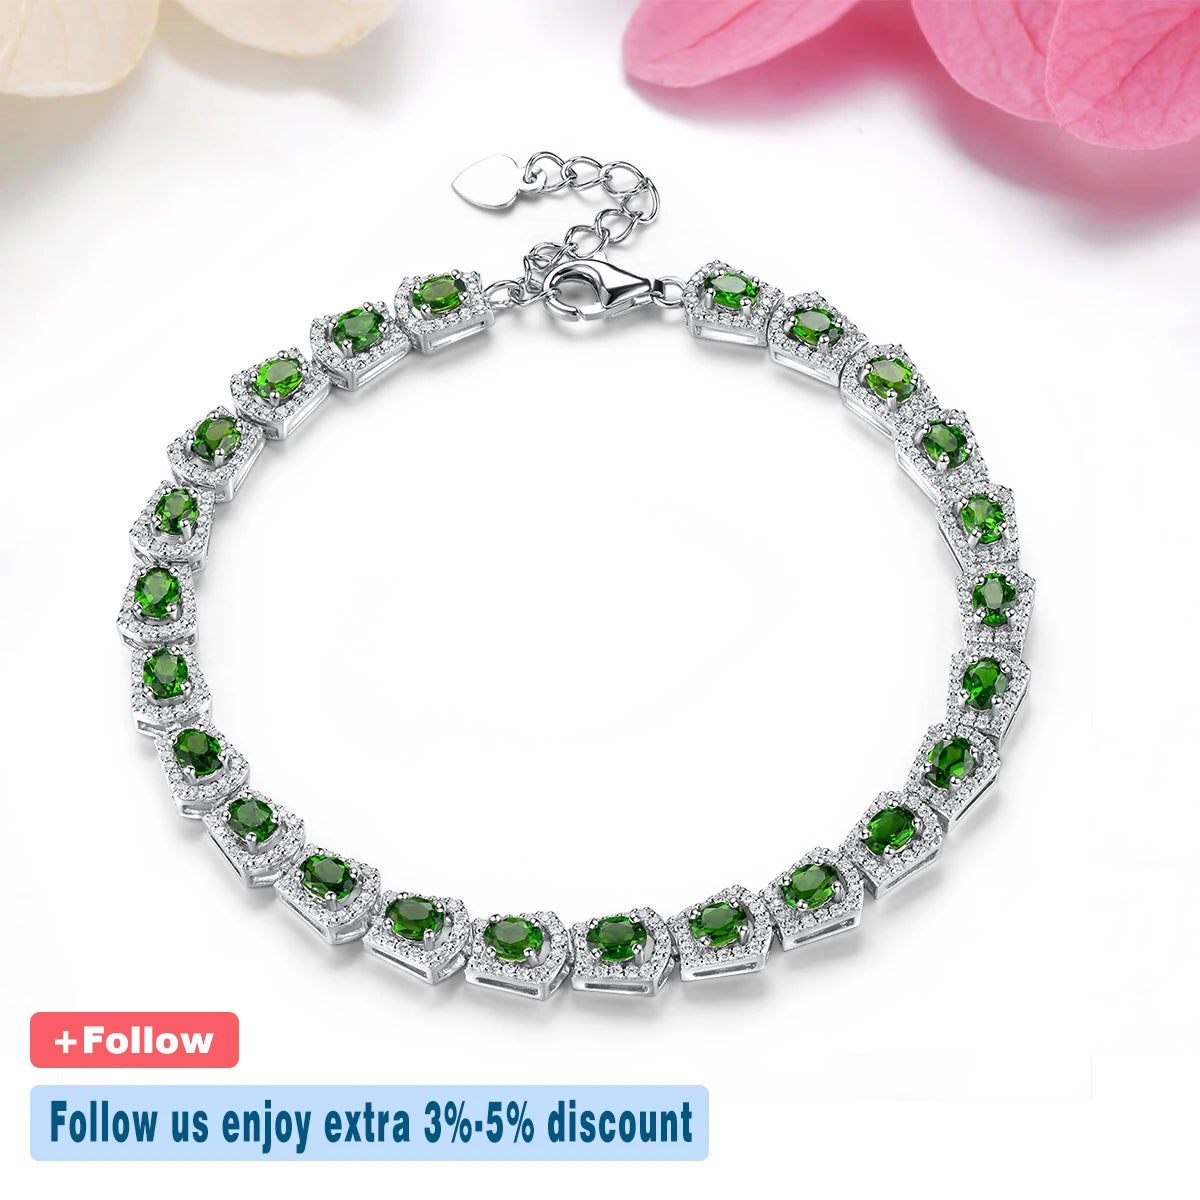 Natural Chrome Diopside Sterling Silver Bracelets 4.5 Carats Genuine Diopside Gemstone Women's Fine Jewelrys New Year Gifts